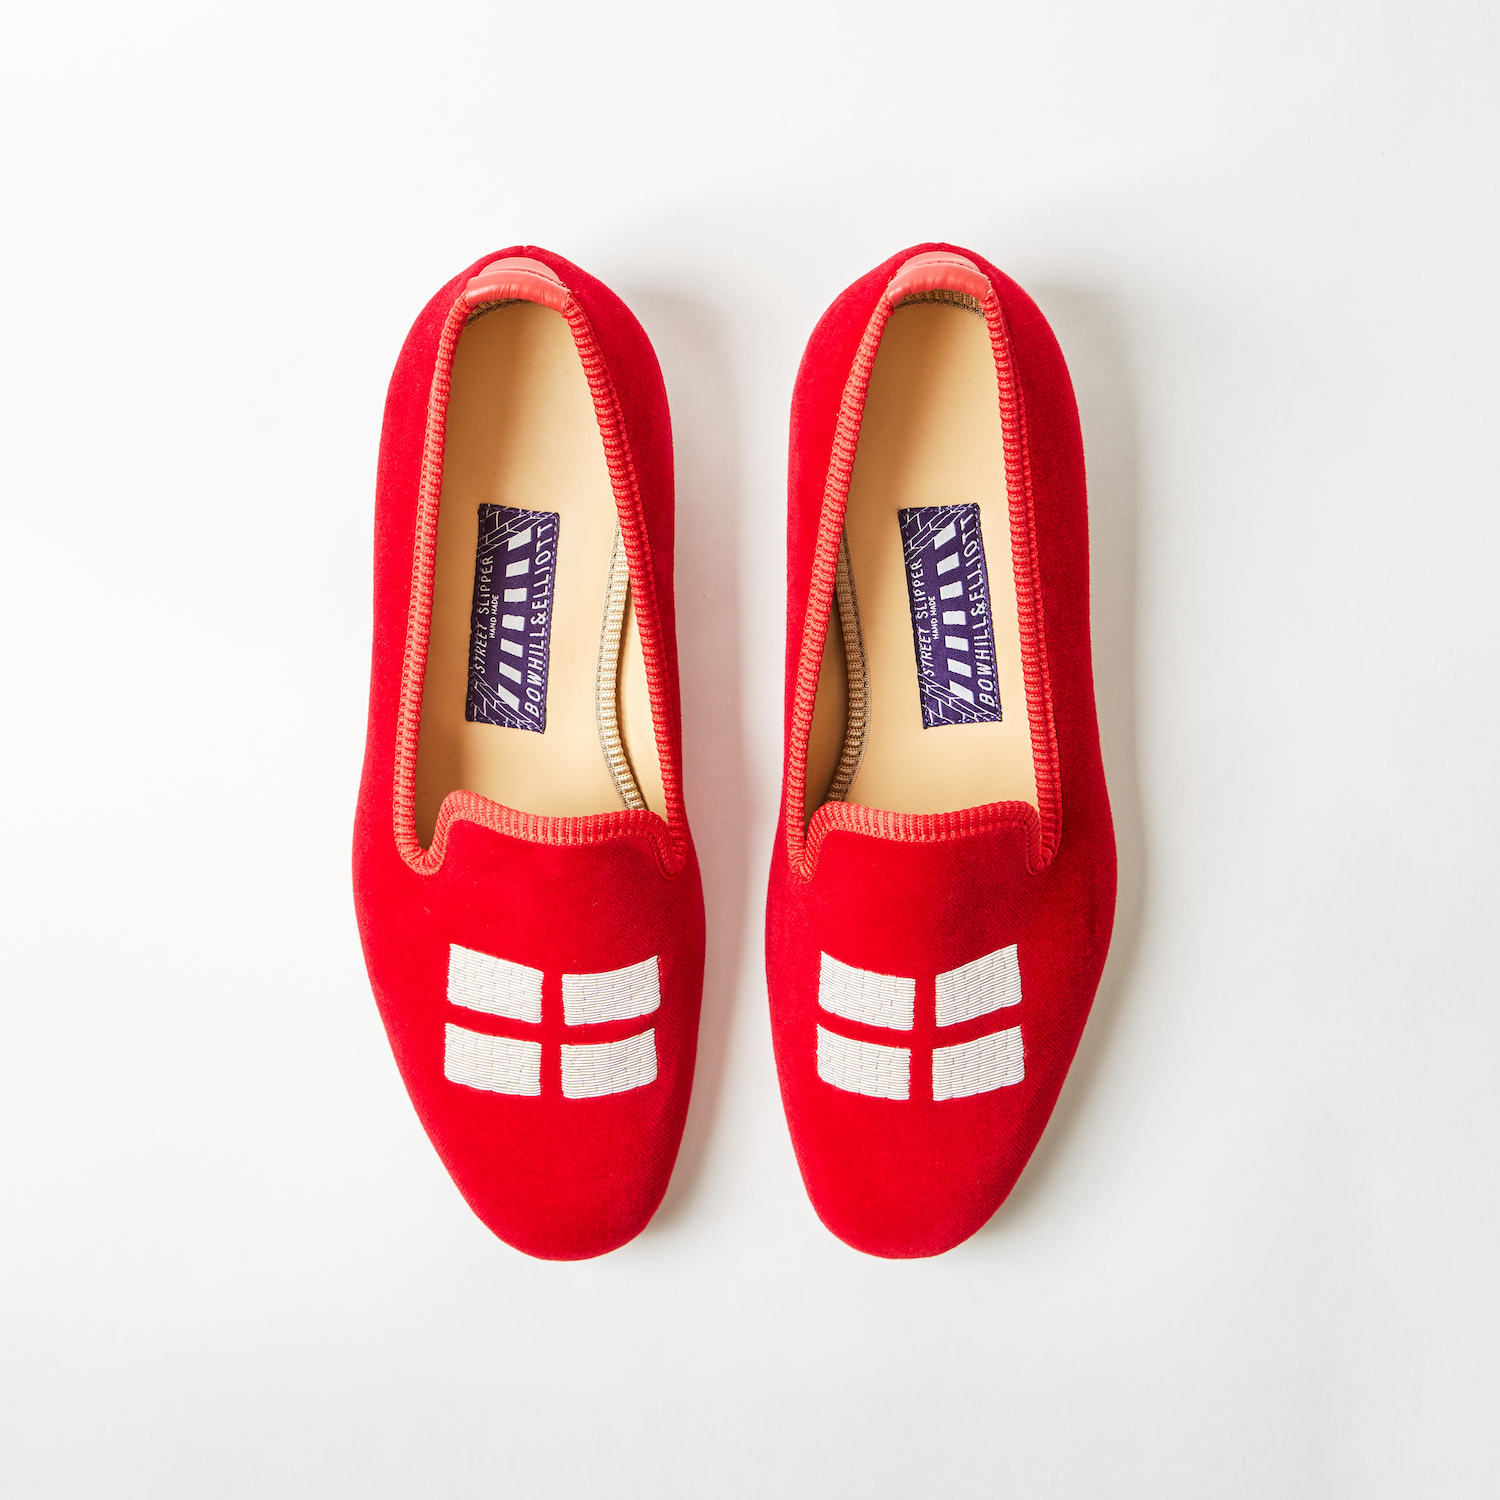 Red Velvet Albert Slippers with Embroidered St George's Cross